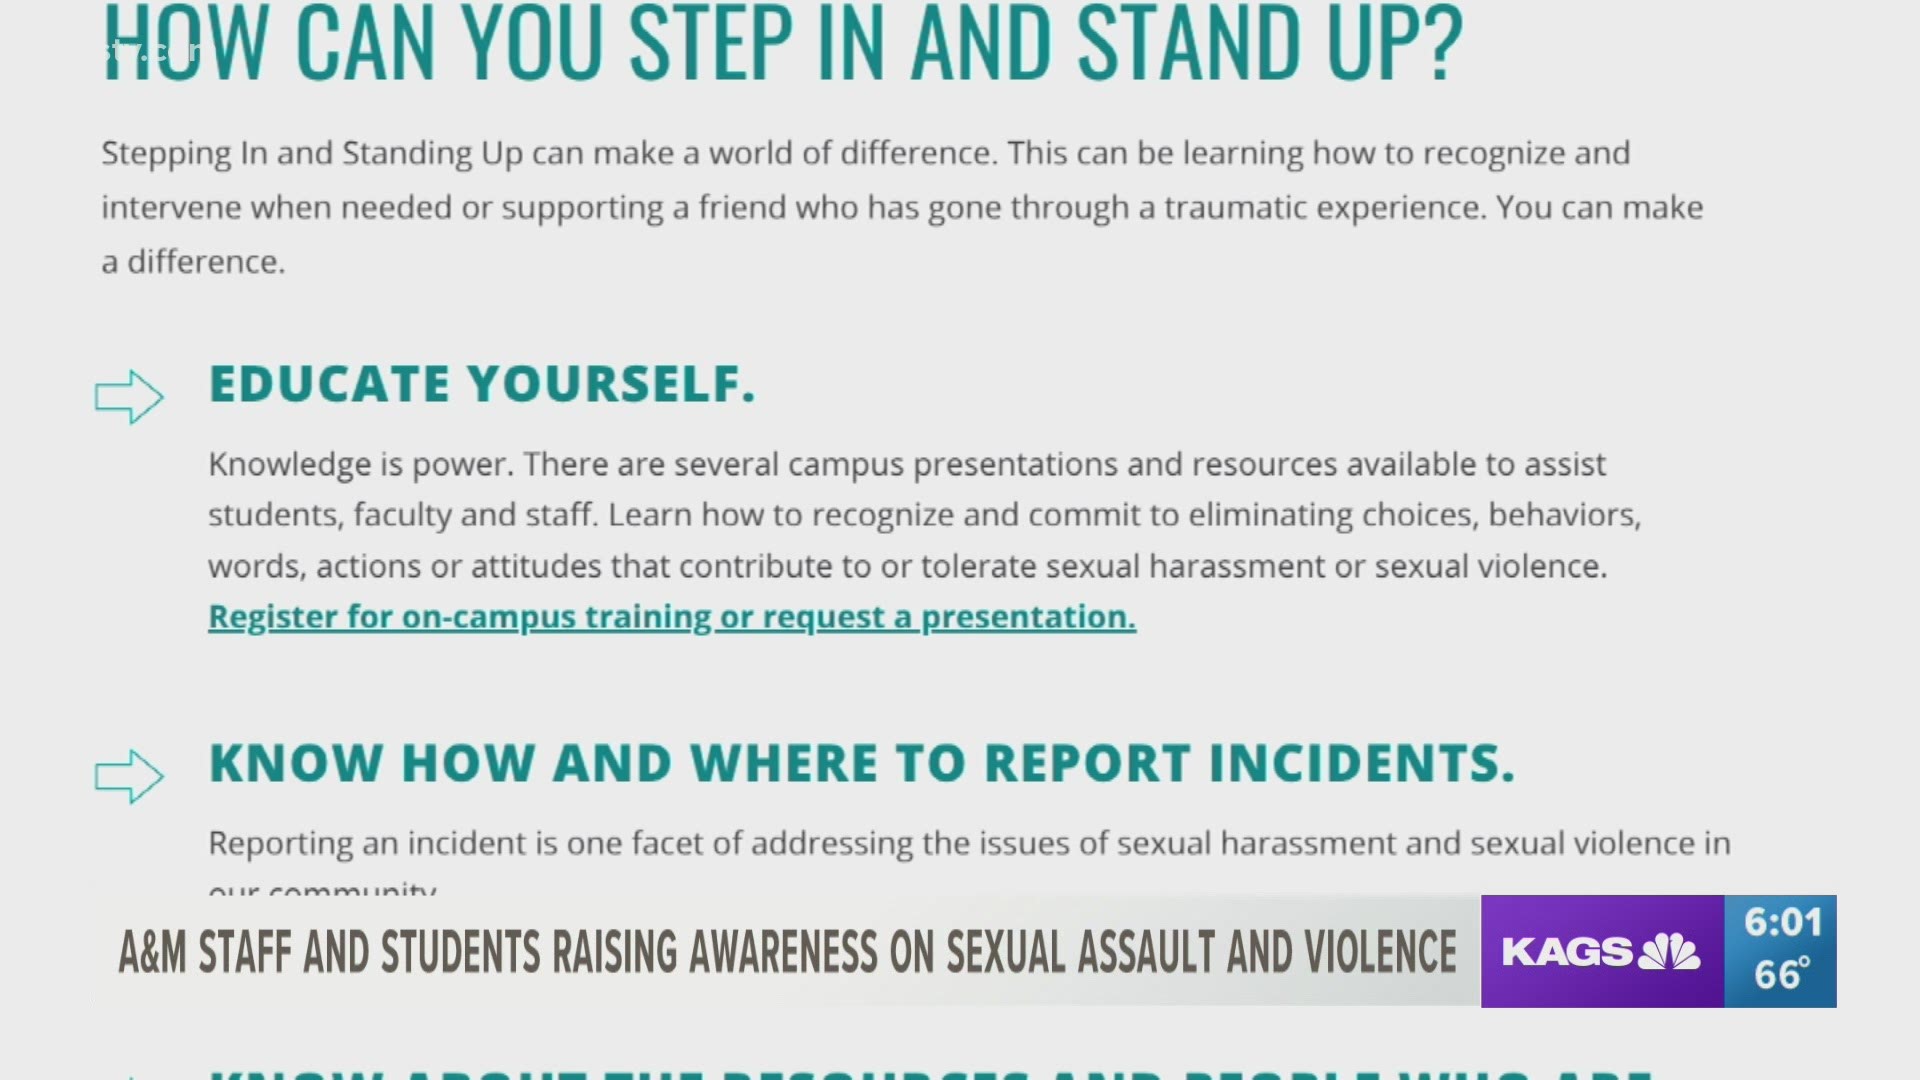 The organizations offer emotional support and resources for those who have experienced sexual violence in the age of COVID-19